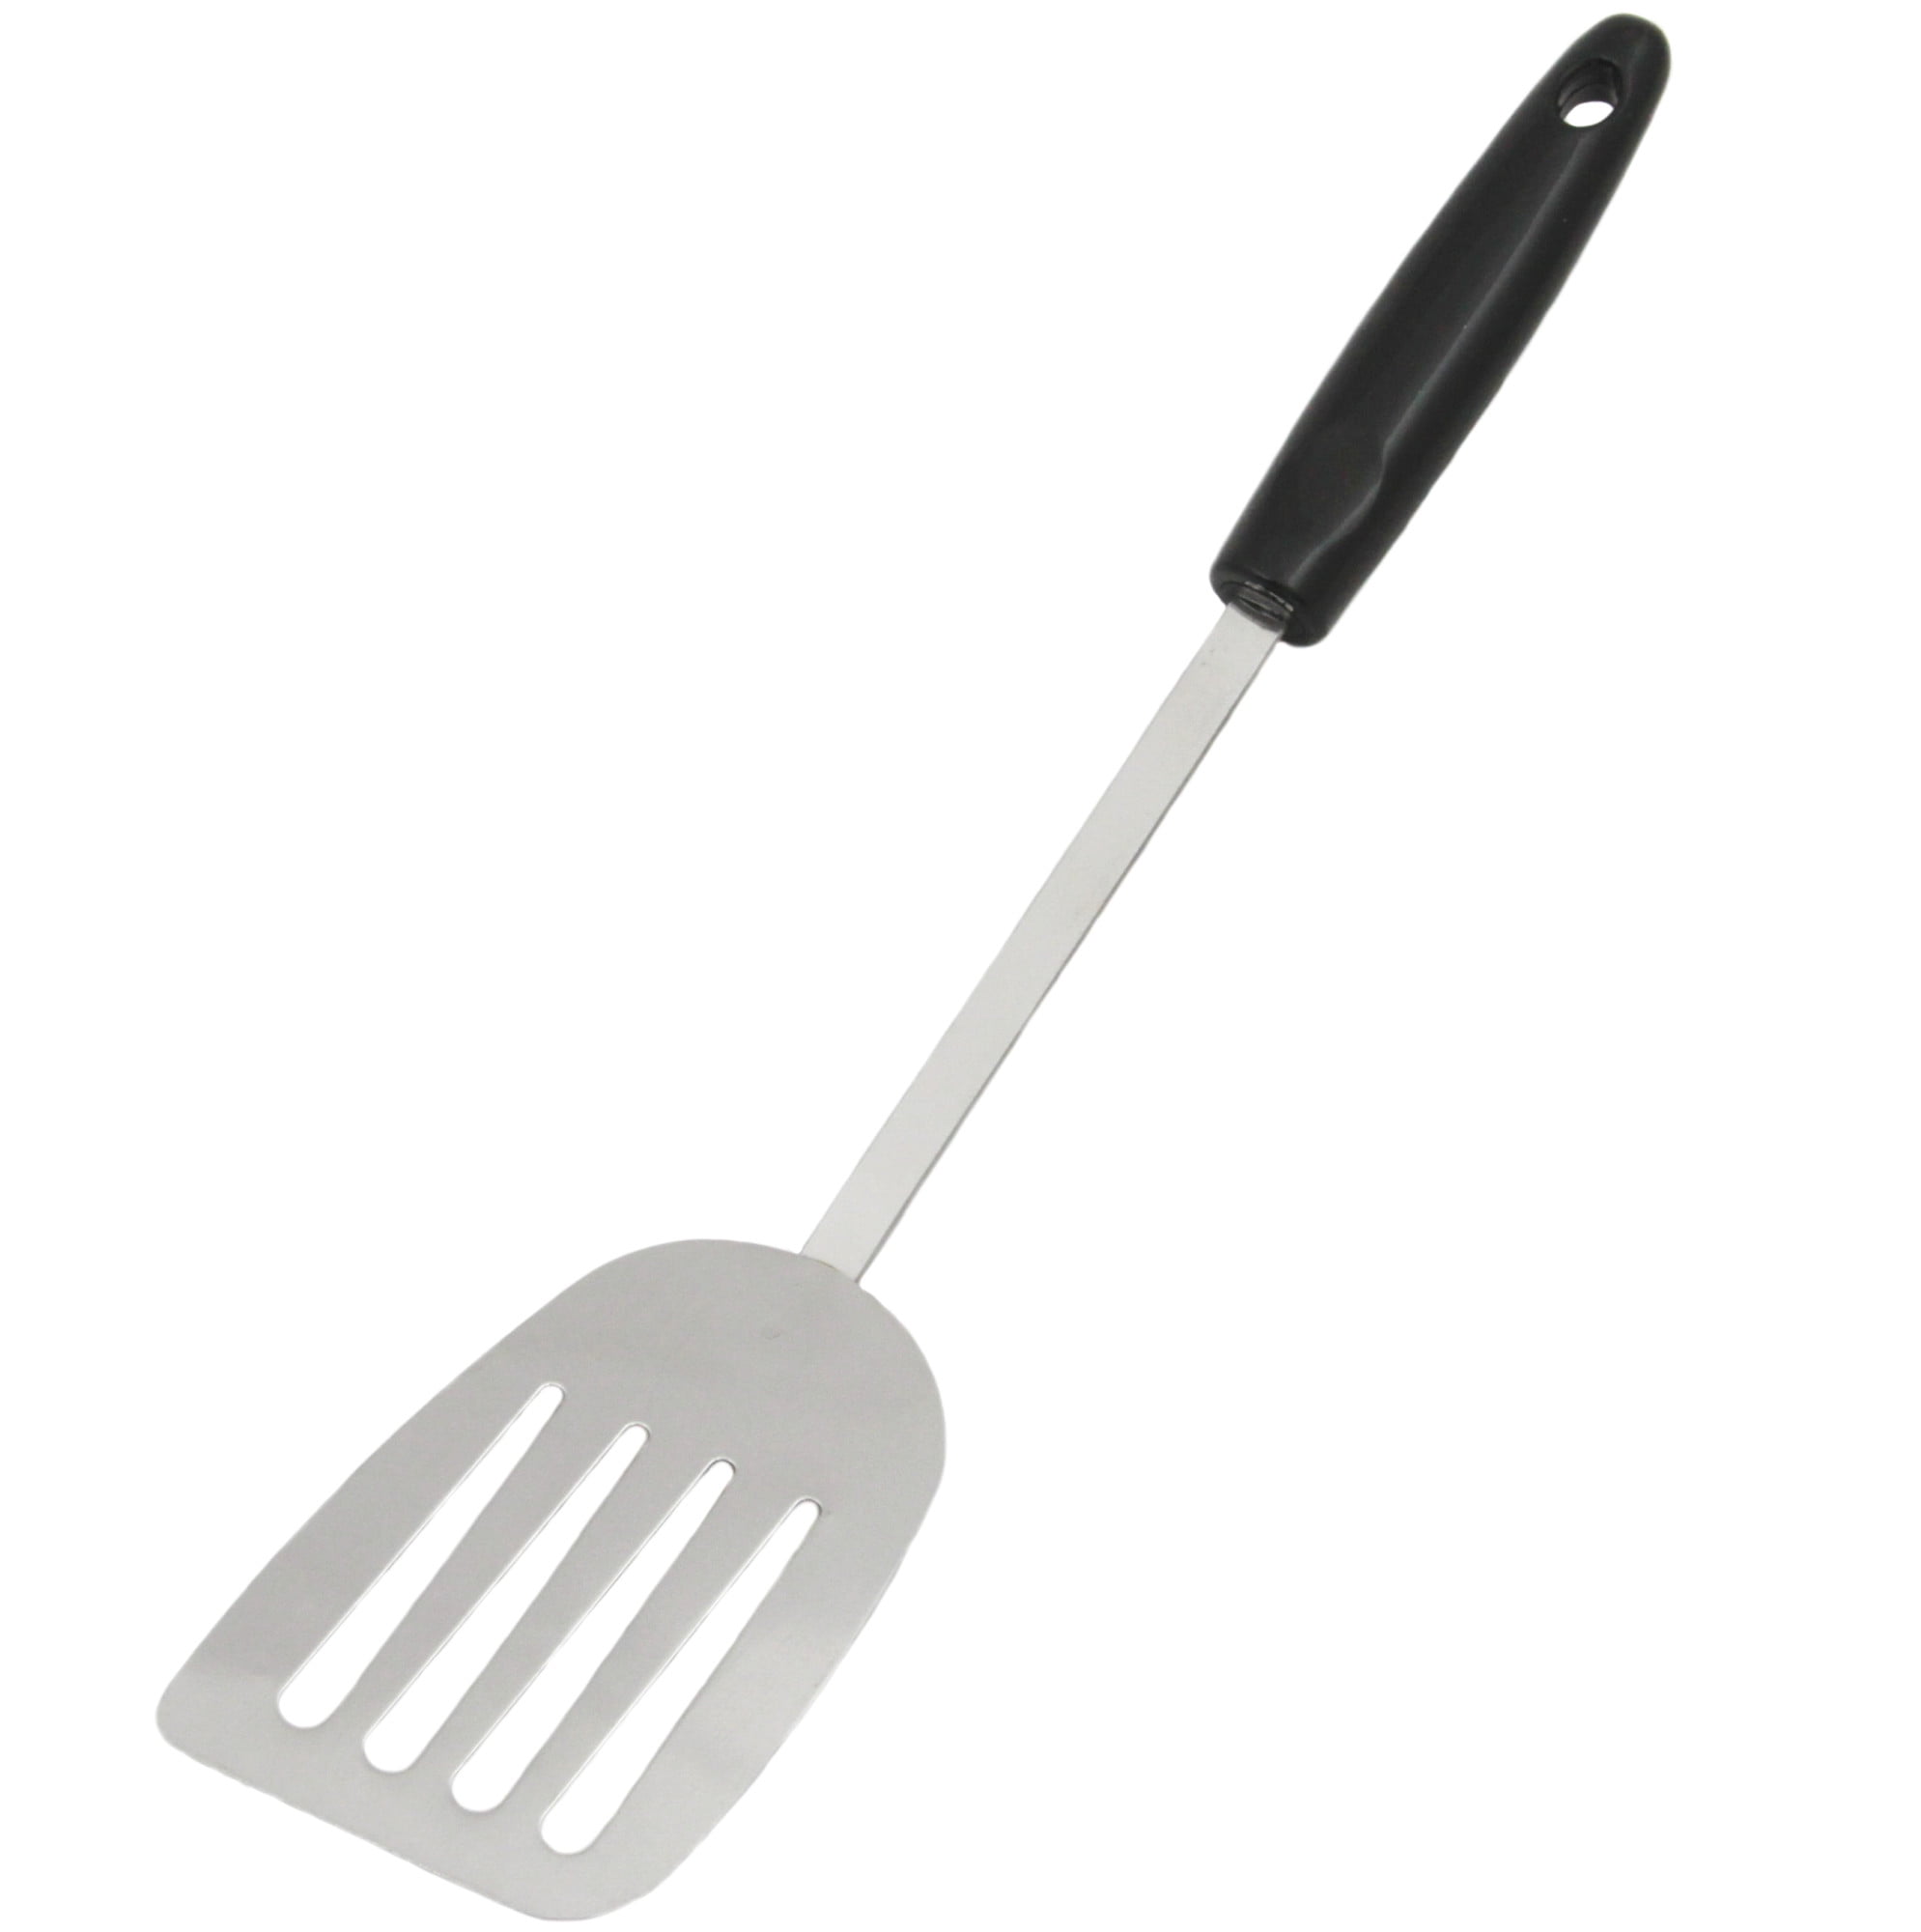 Stainless Steel Pastry Spatula 40 cm Black Handle